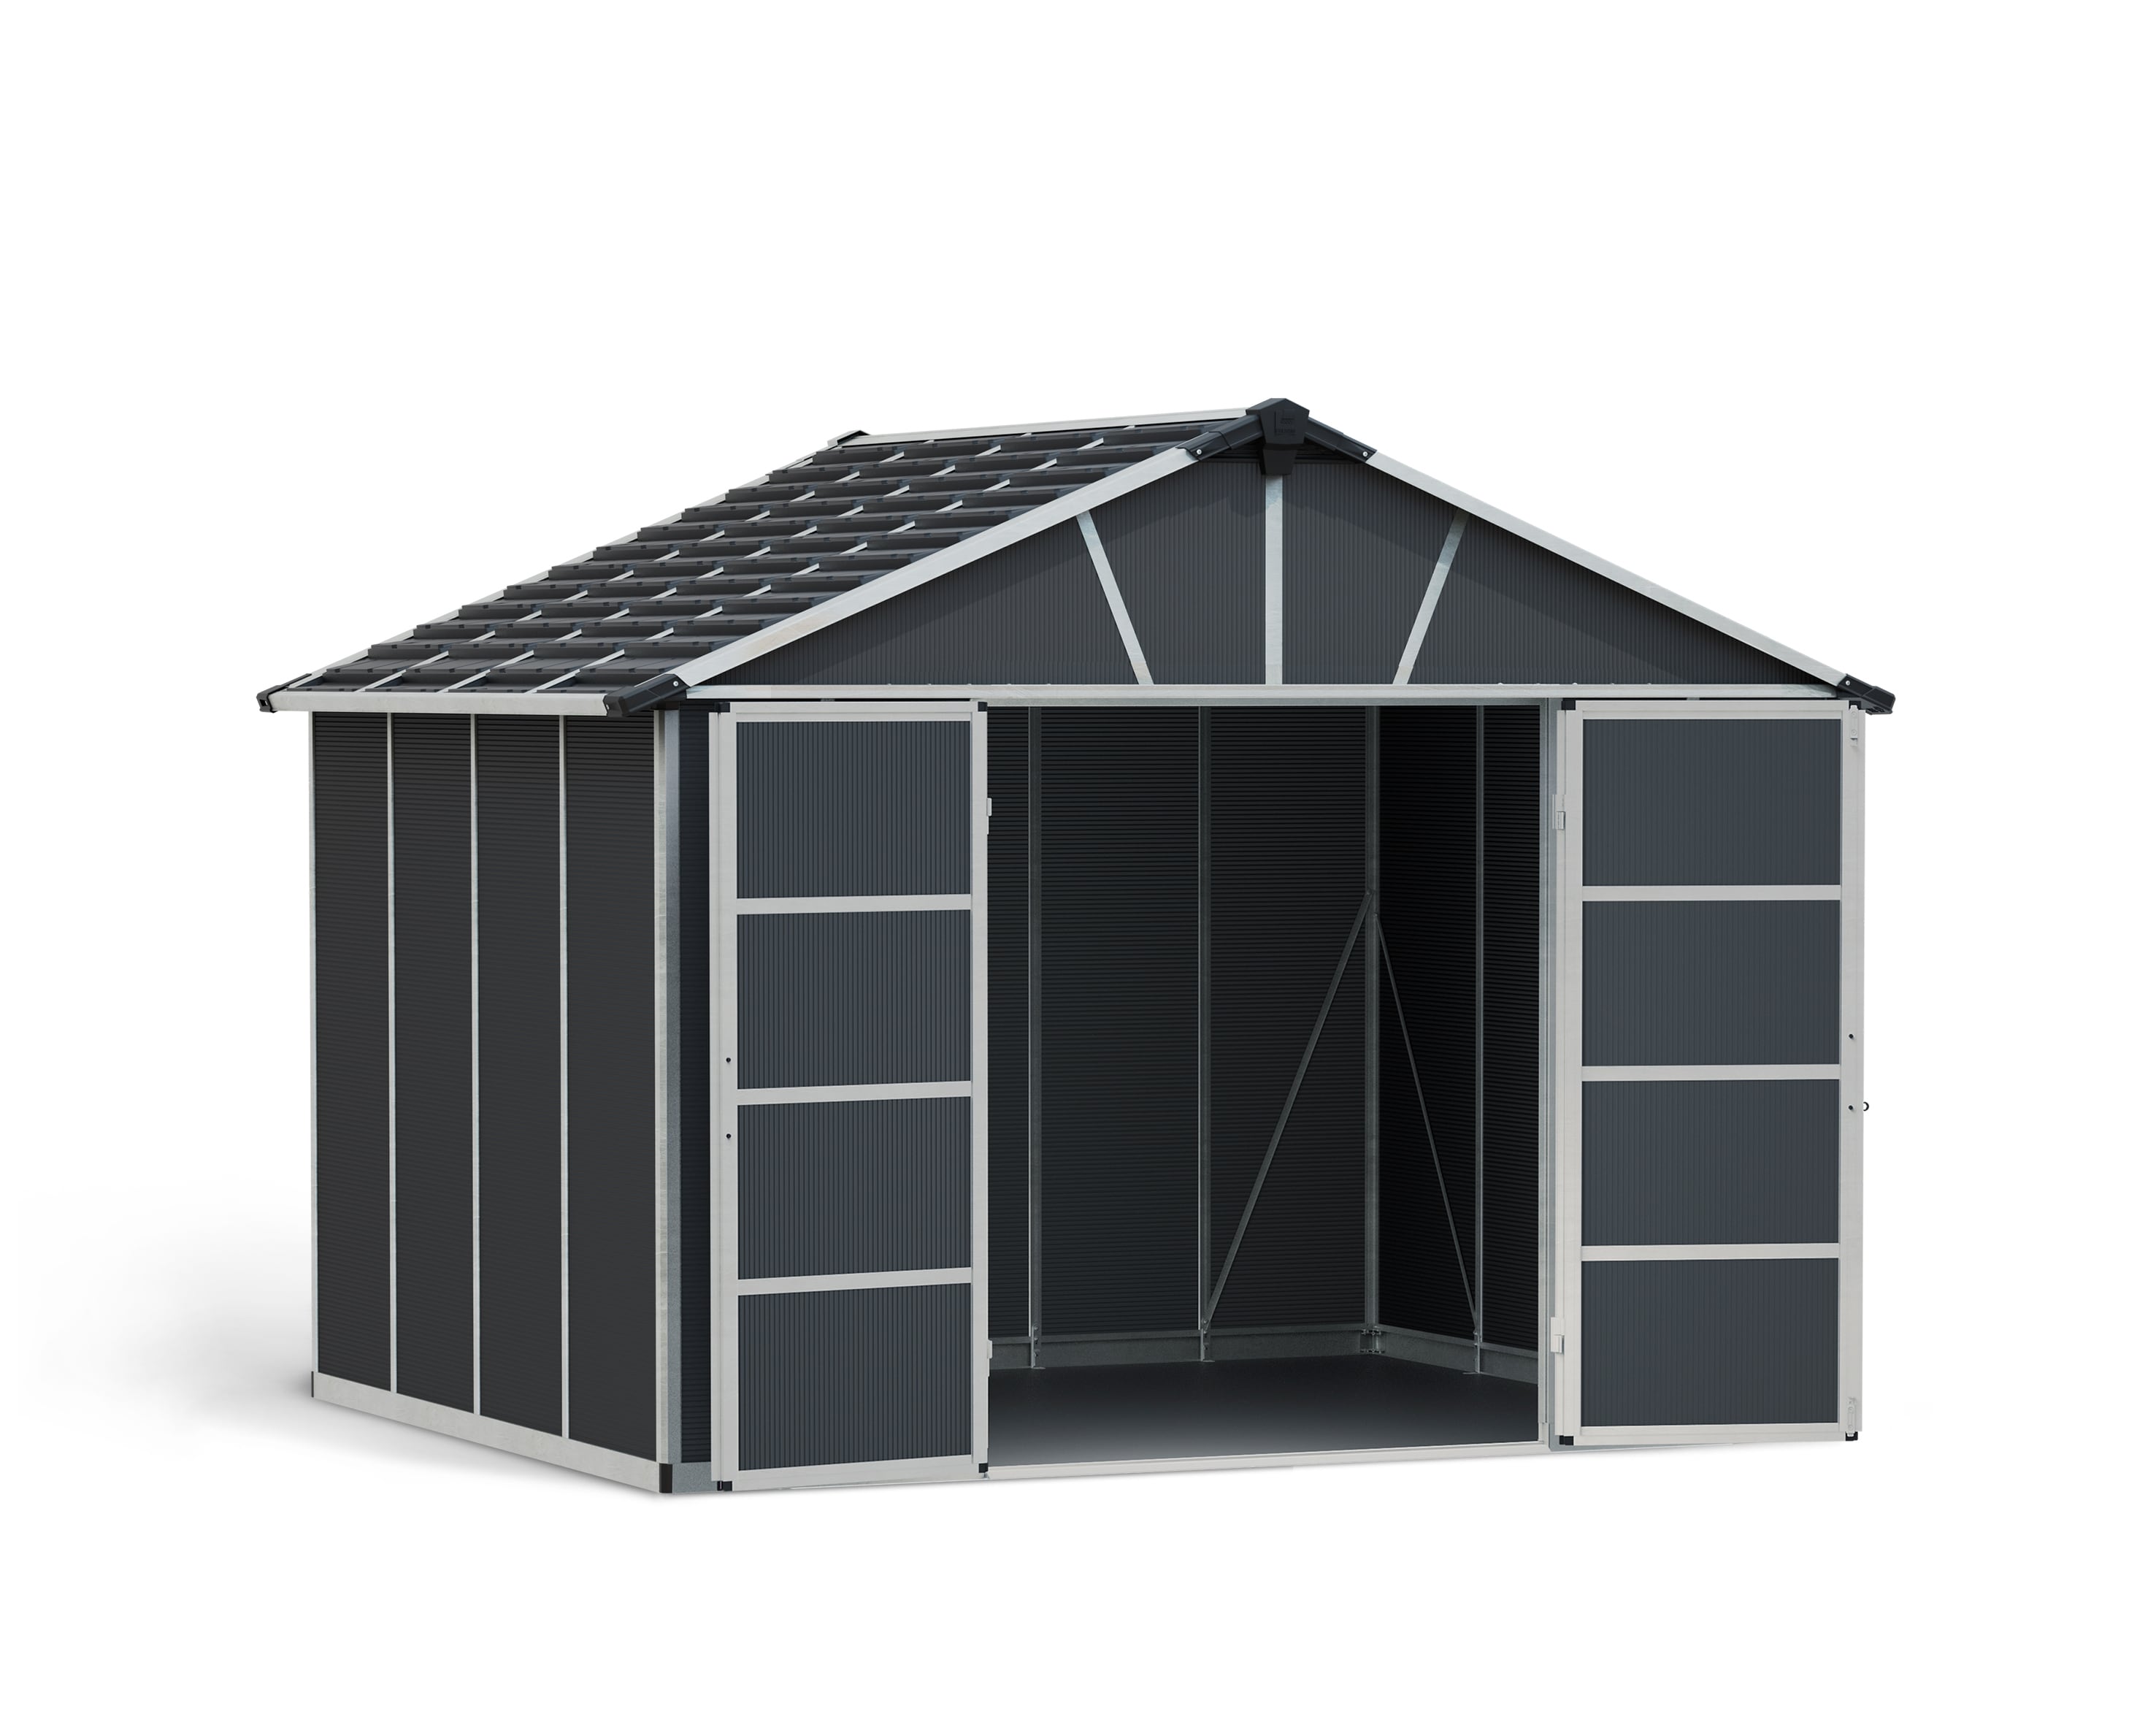 Install Only - Rubbermaid Plastic Storage Shed 10 FT. x 7 FT. (70 sq. ft.)